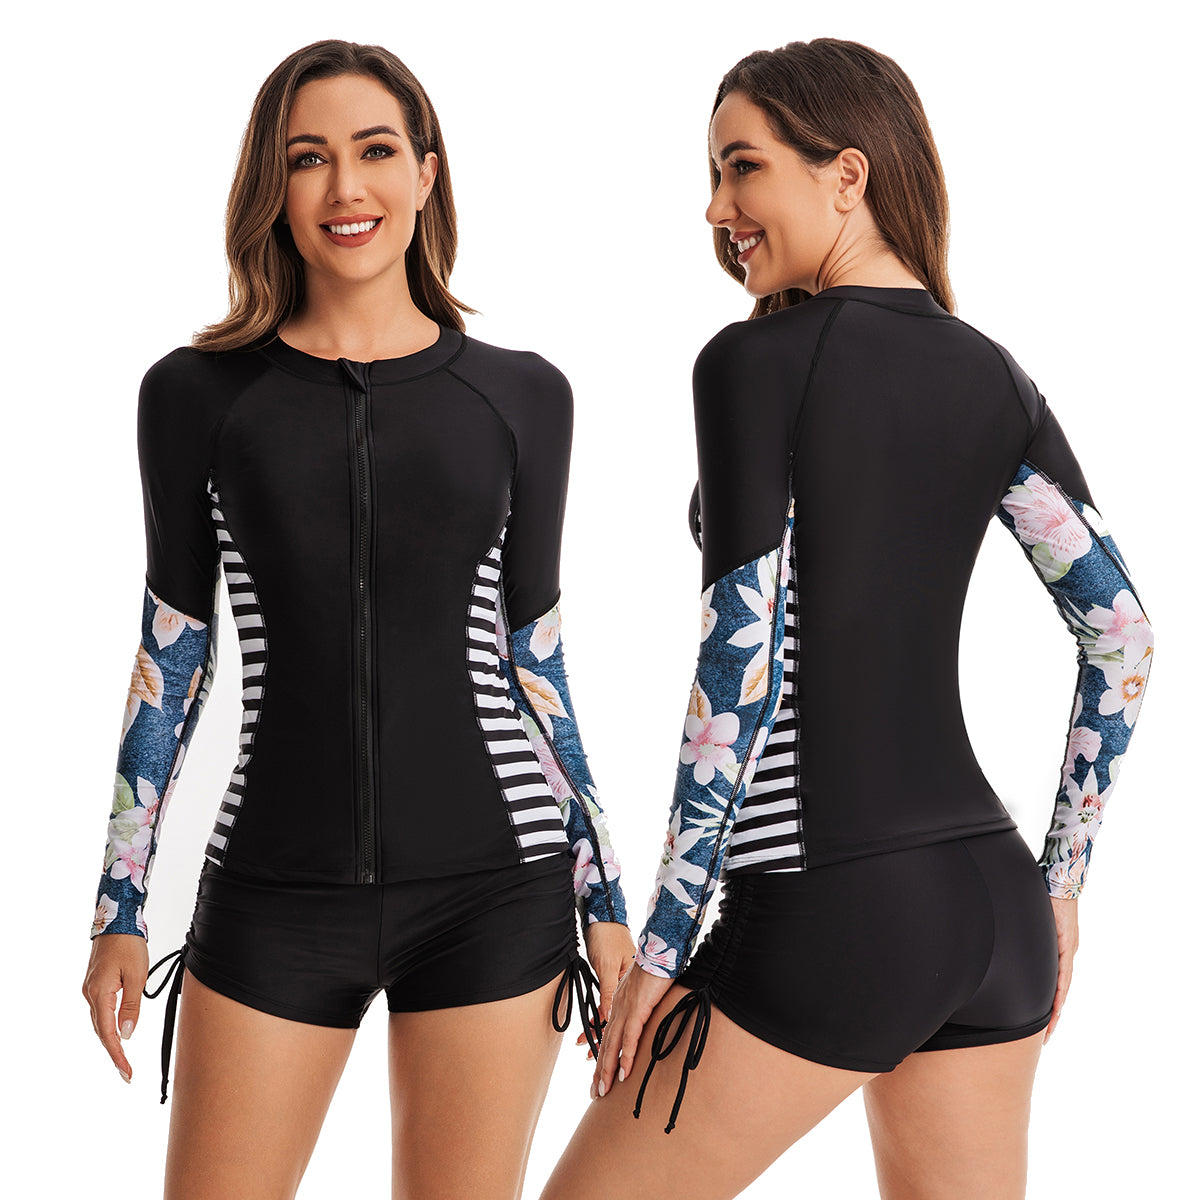 2022 NEW Surfing Swimming Shirts with Bottom